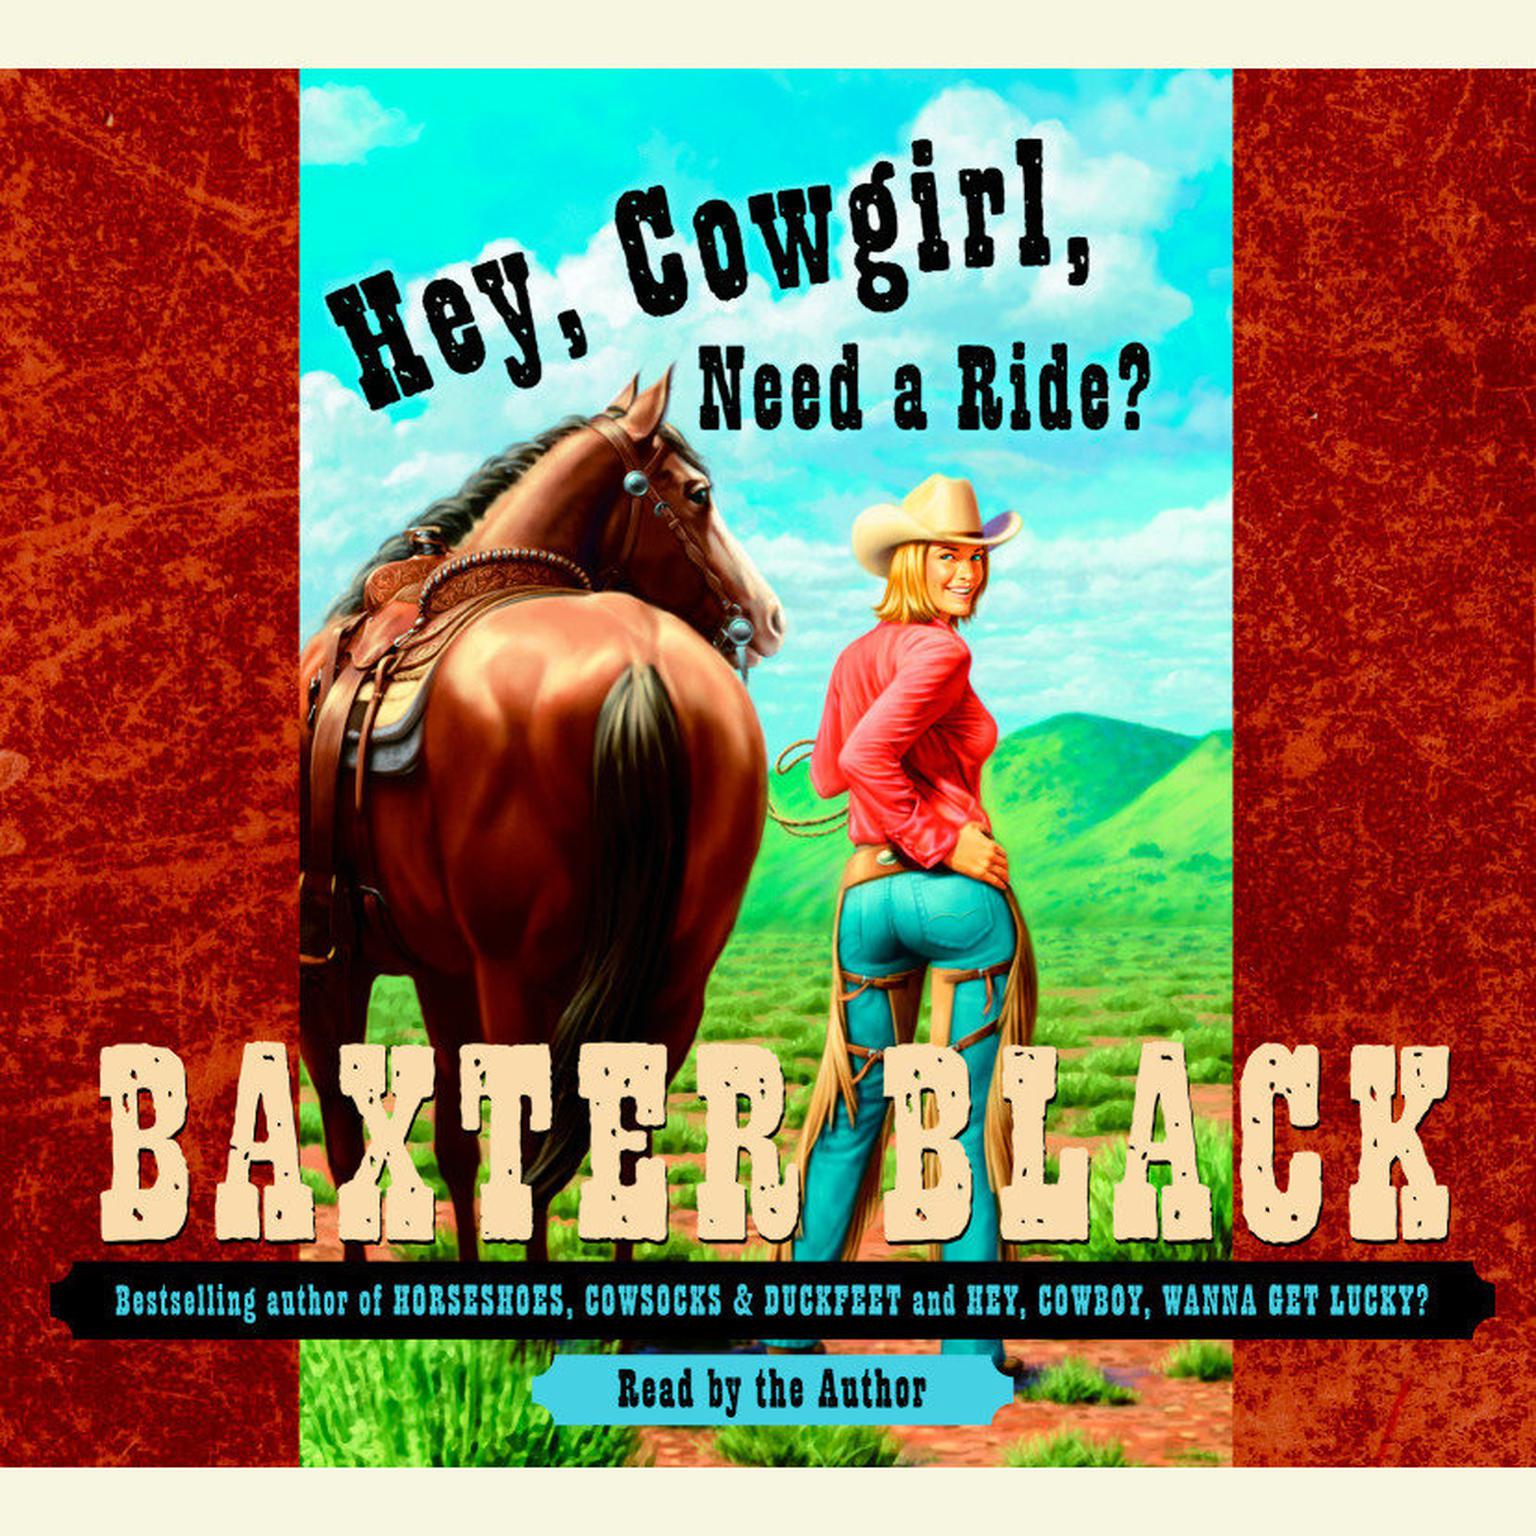 Hey, Cowgirl, Need a Ride? (Abridged) Audiobook, by Baxter Black